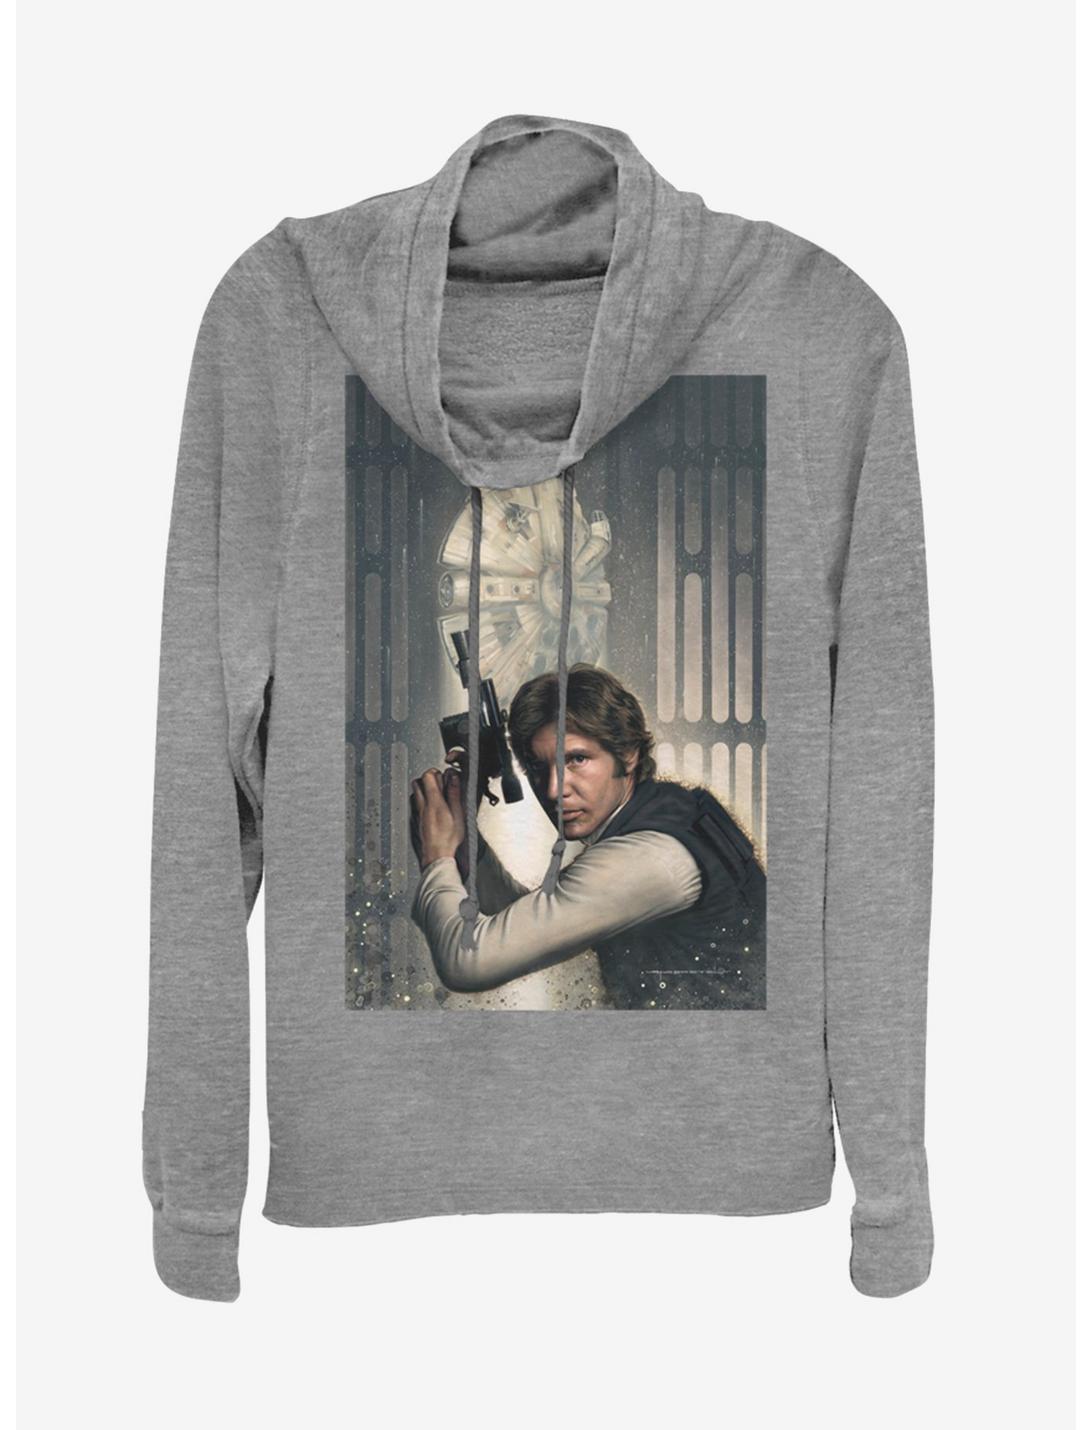 Star Wars Han Solo Painting Cowlneck Long-Sleeve Womens Top, GRAY HTR, hi-res